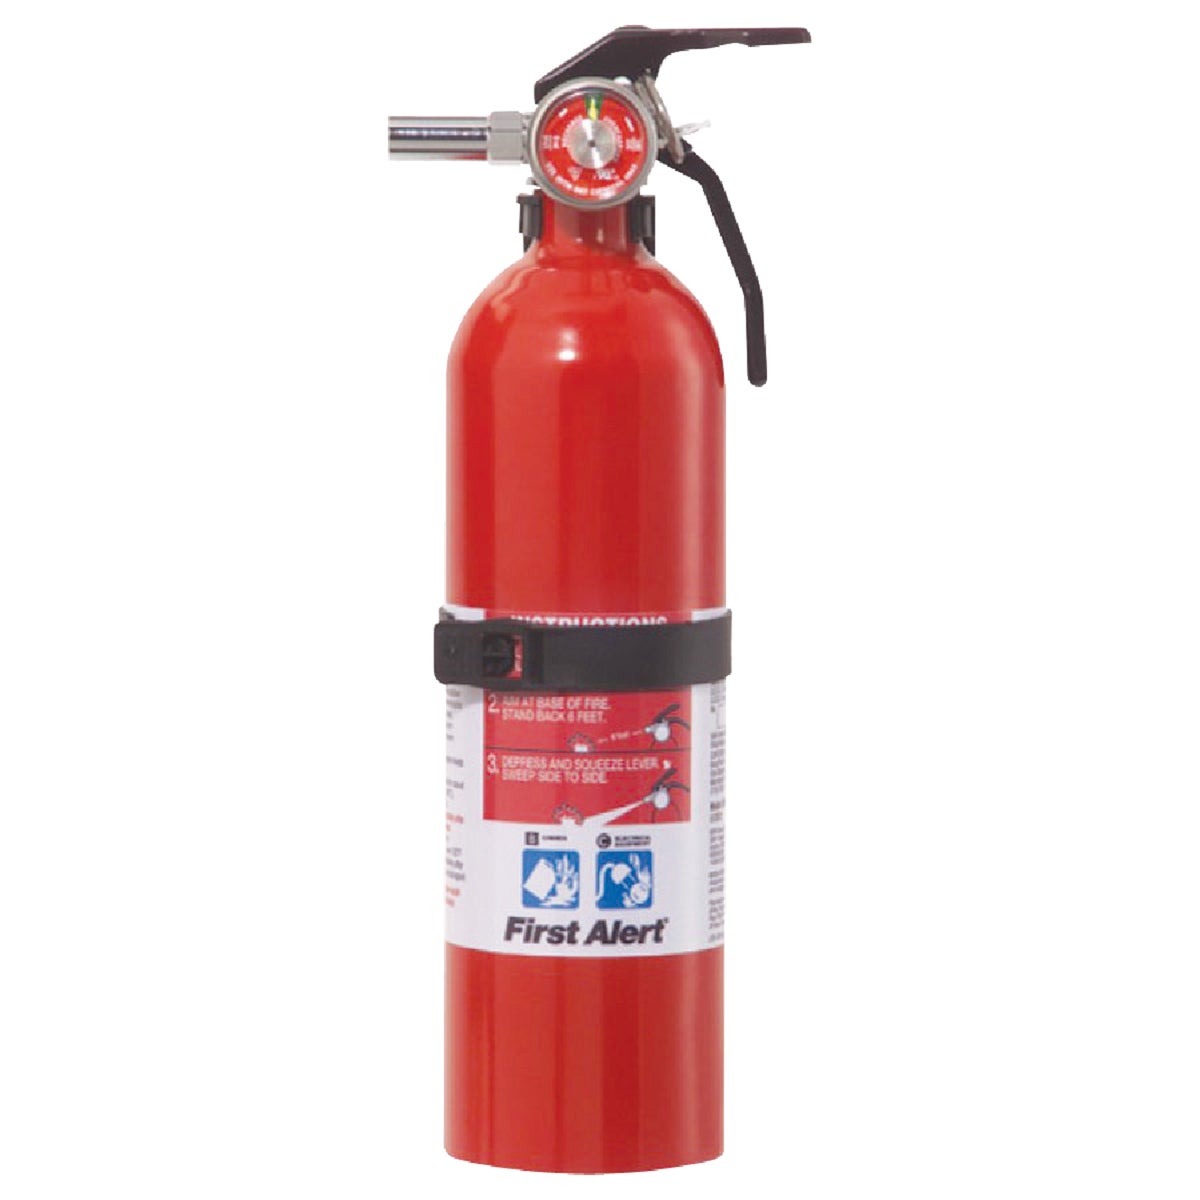 Item 350109, Rechargeable fire extinguisher ideal for kitchen, auto, and boat 